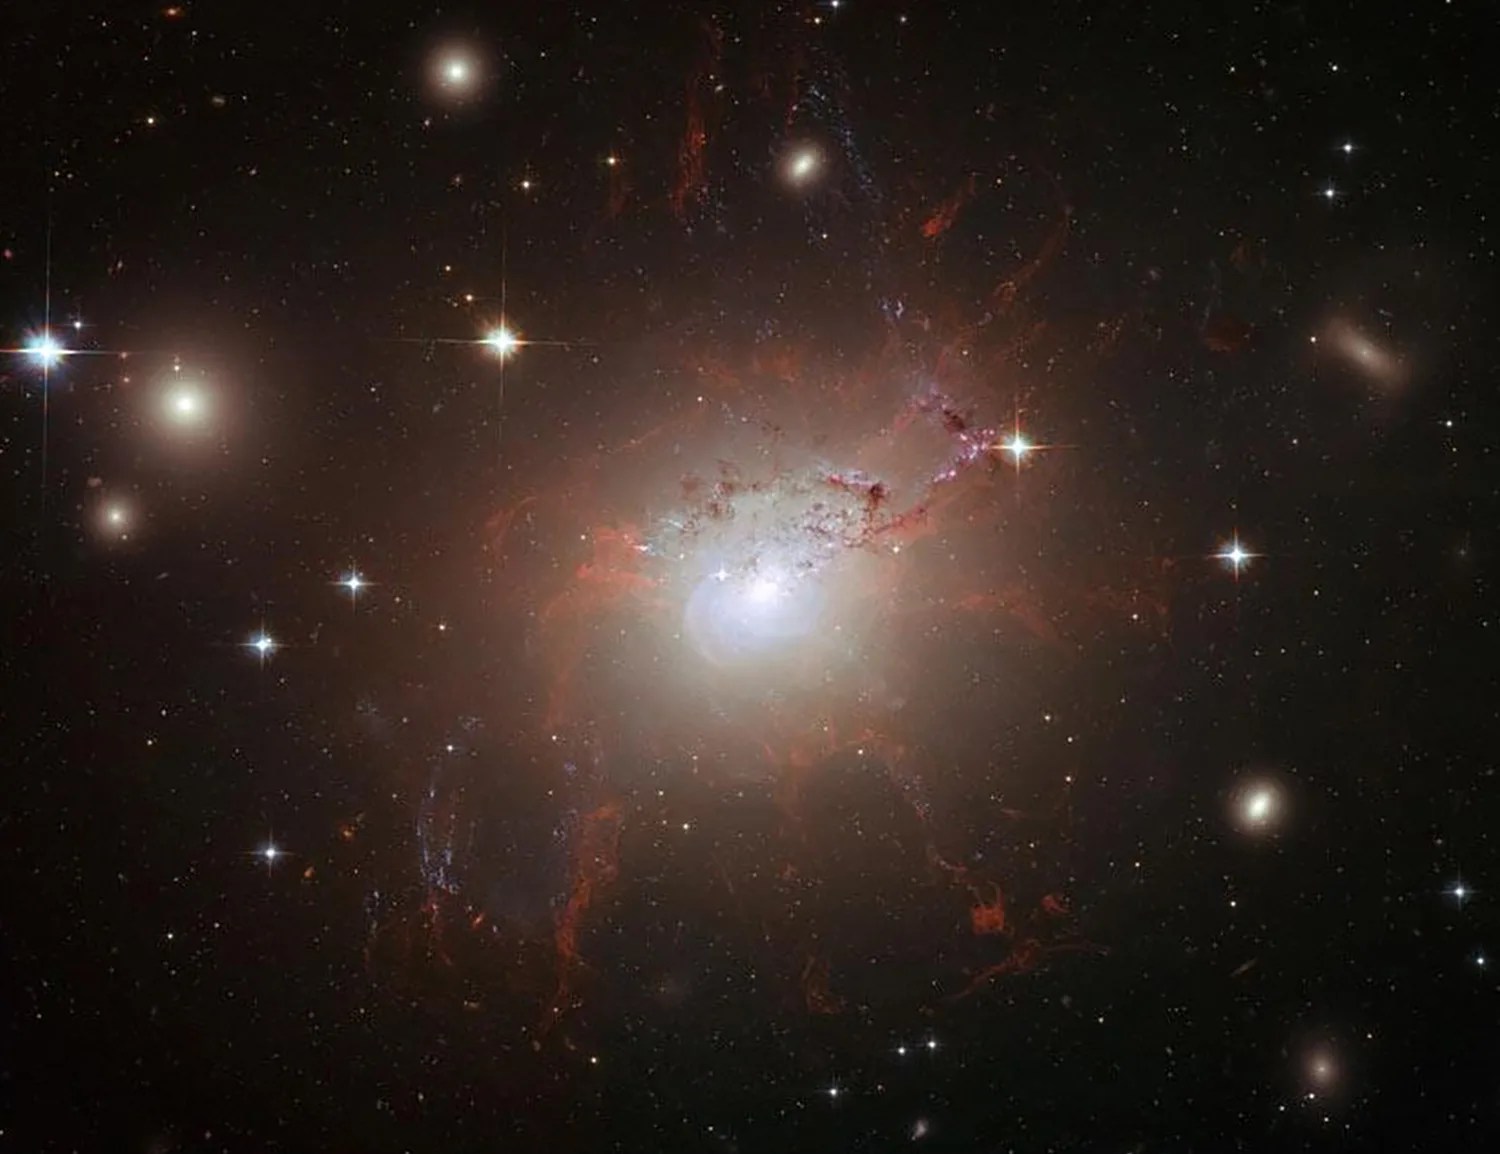 Large glob of stars surrounded by dark rusty red gas and dust. Huge bright stars surround the bright galaxy in the center.